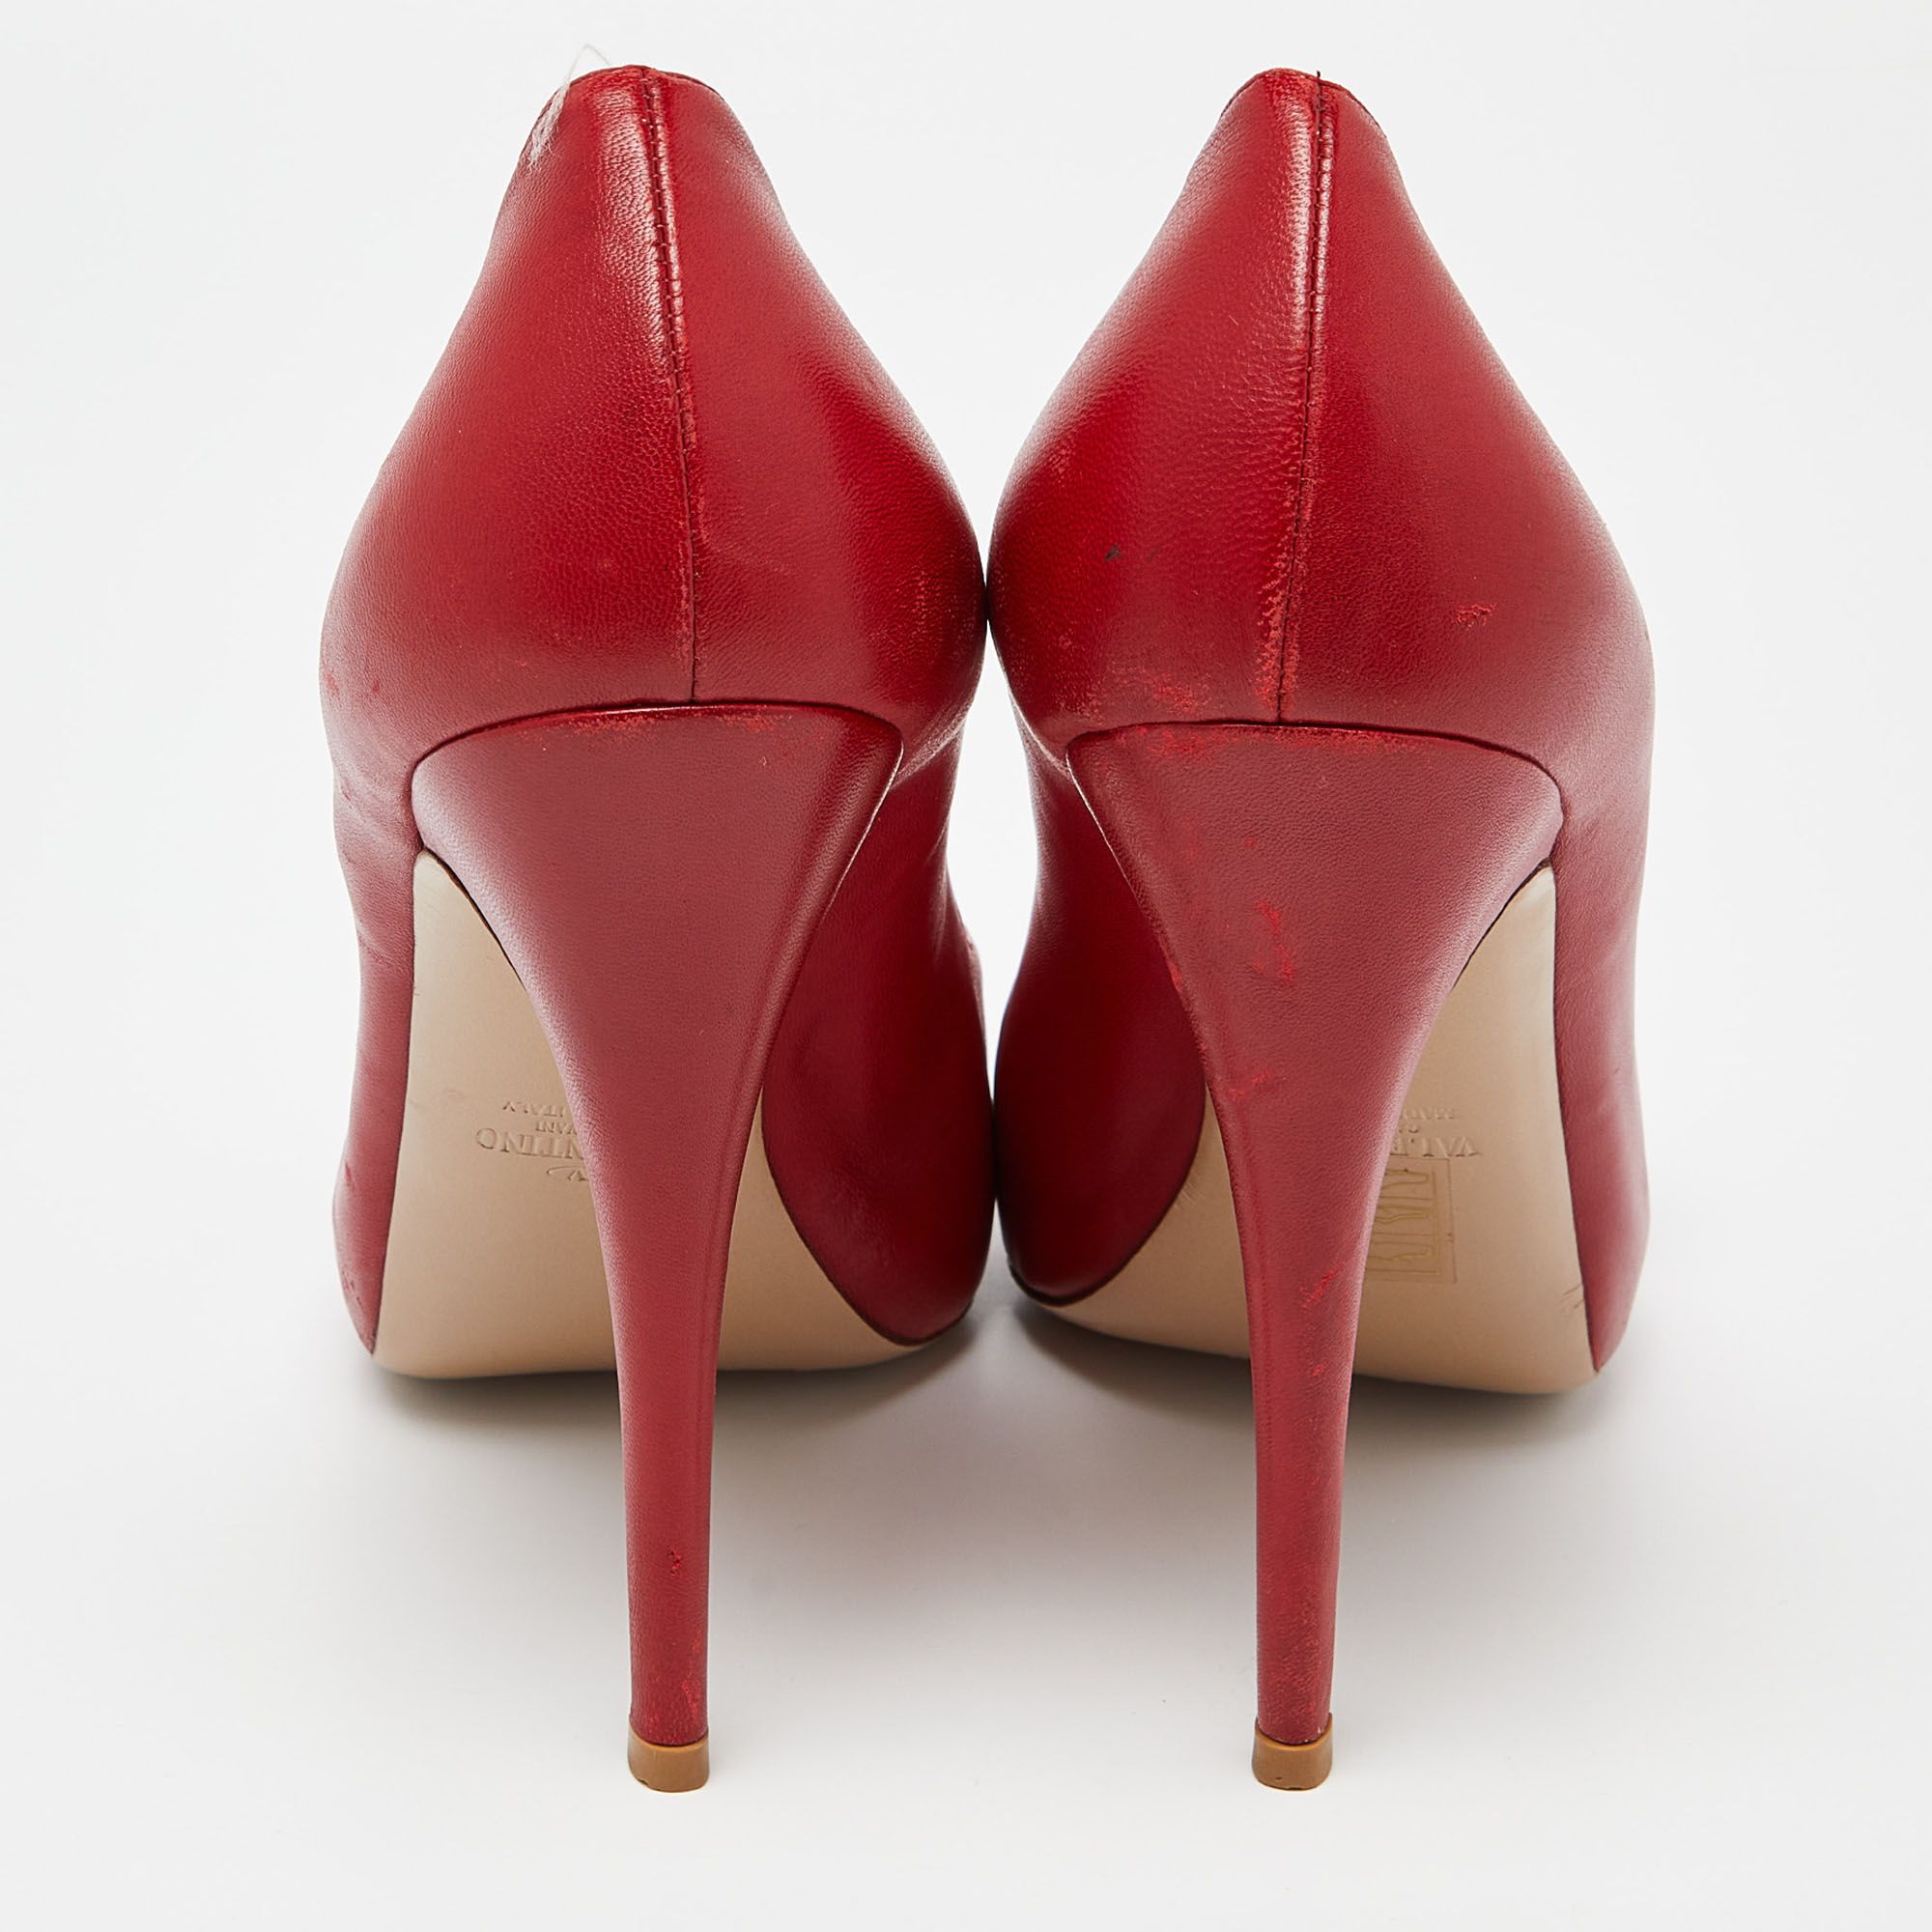 Valentino Red Leather Rose Applique Peep Toe Pumps Size 41